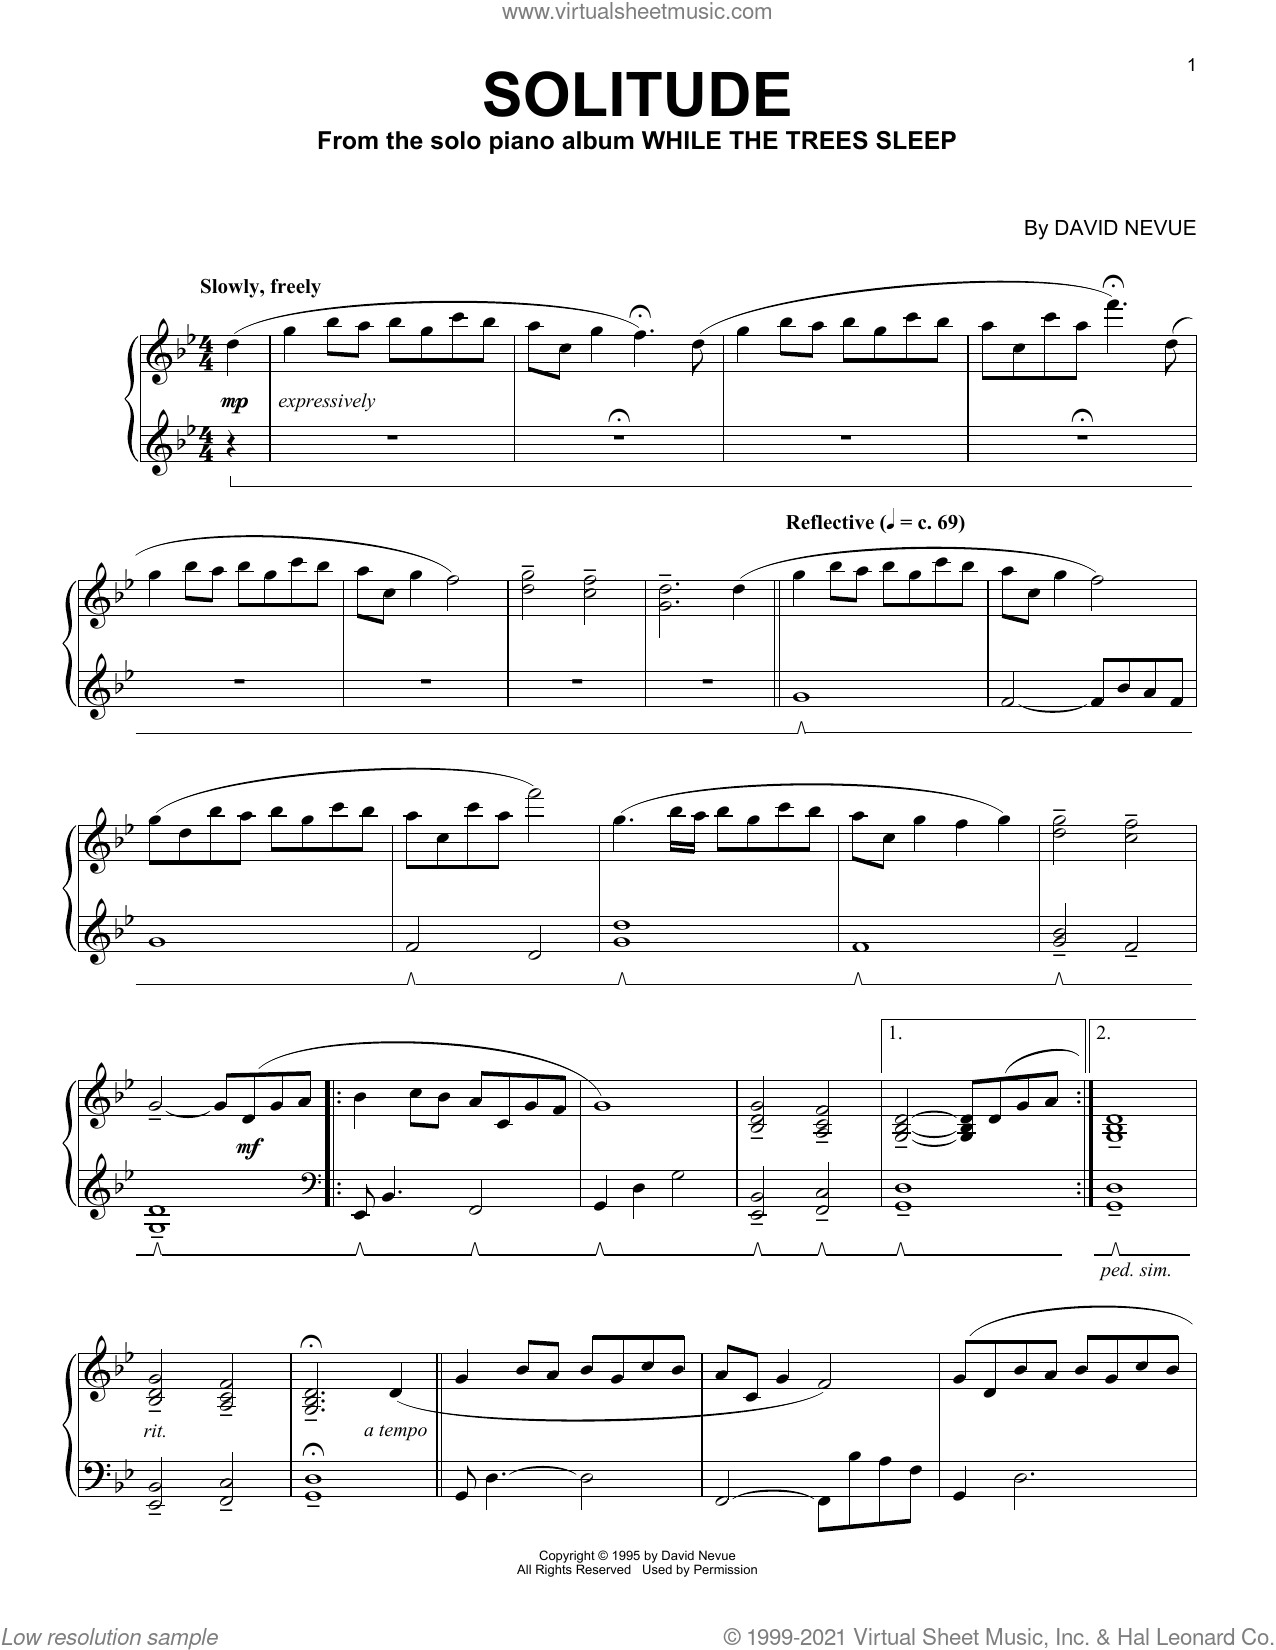 7 Years sheet music for piano solo (PDF-interactive)